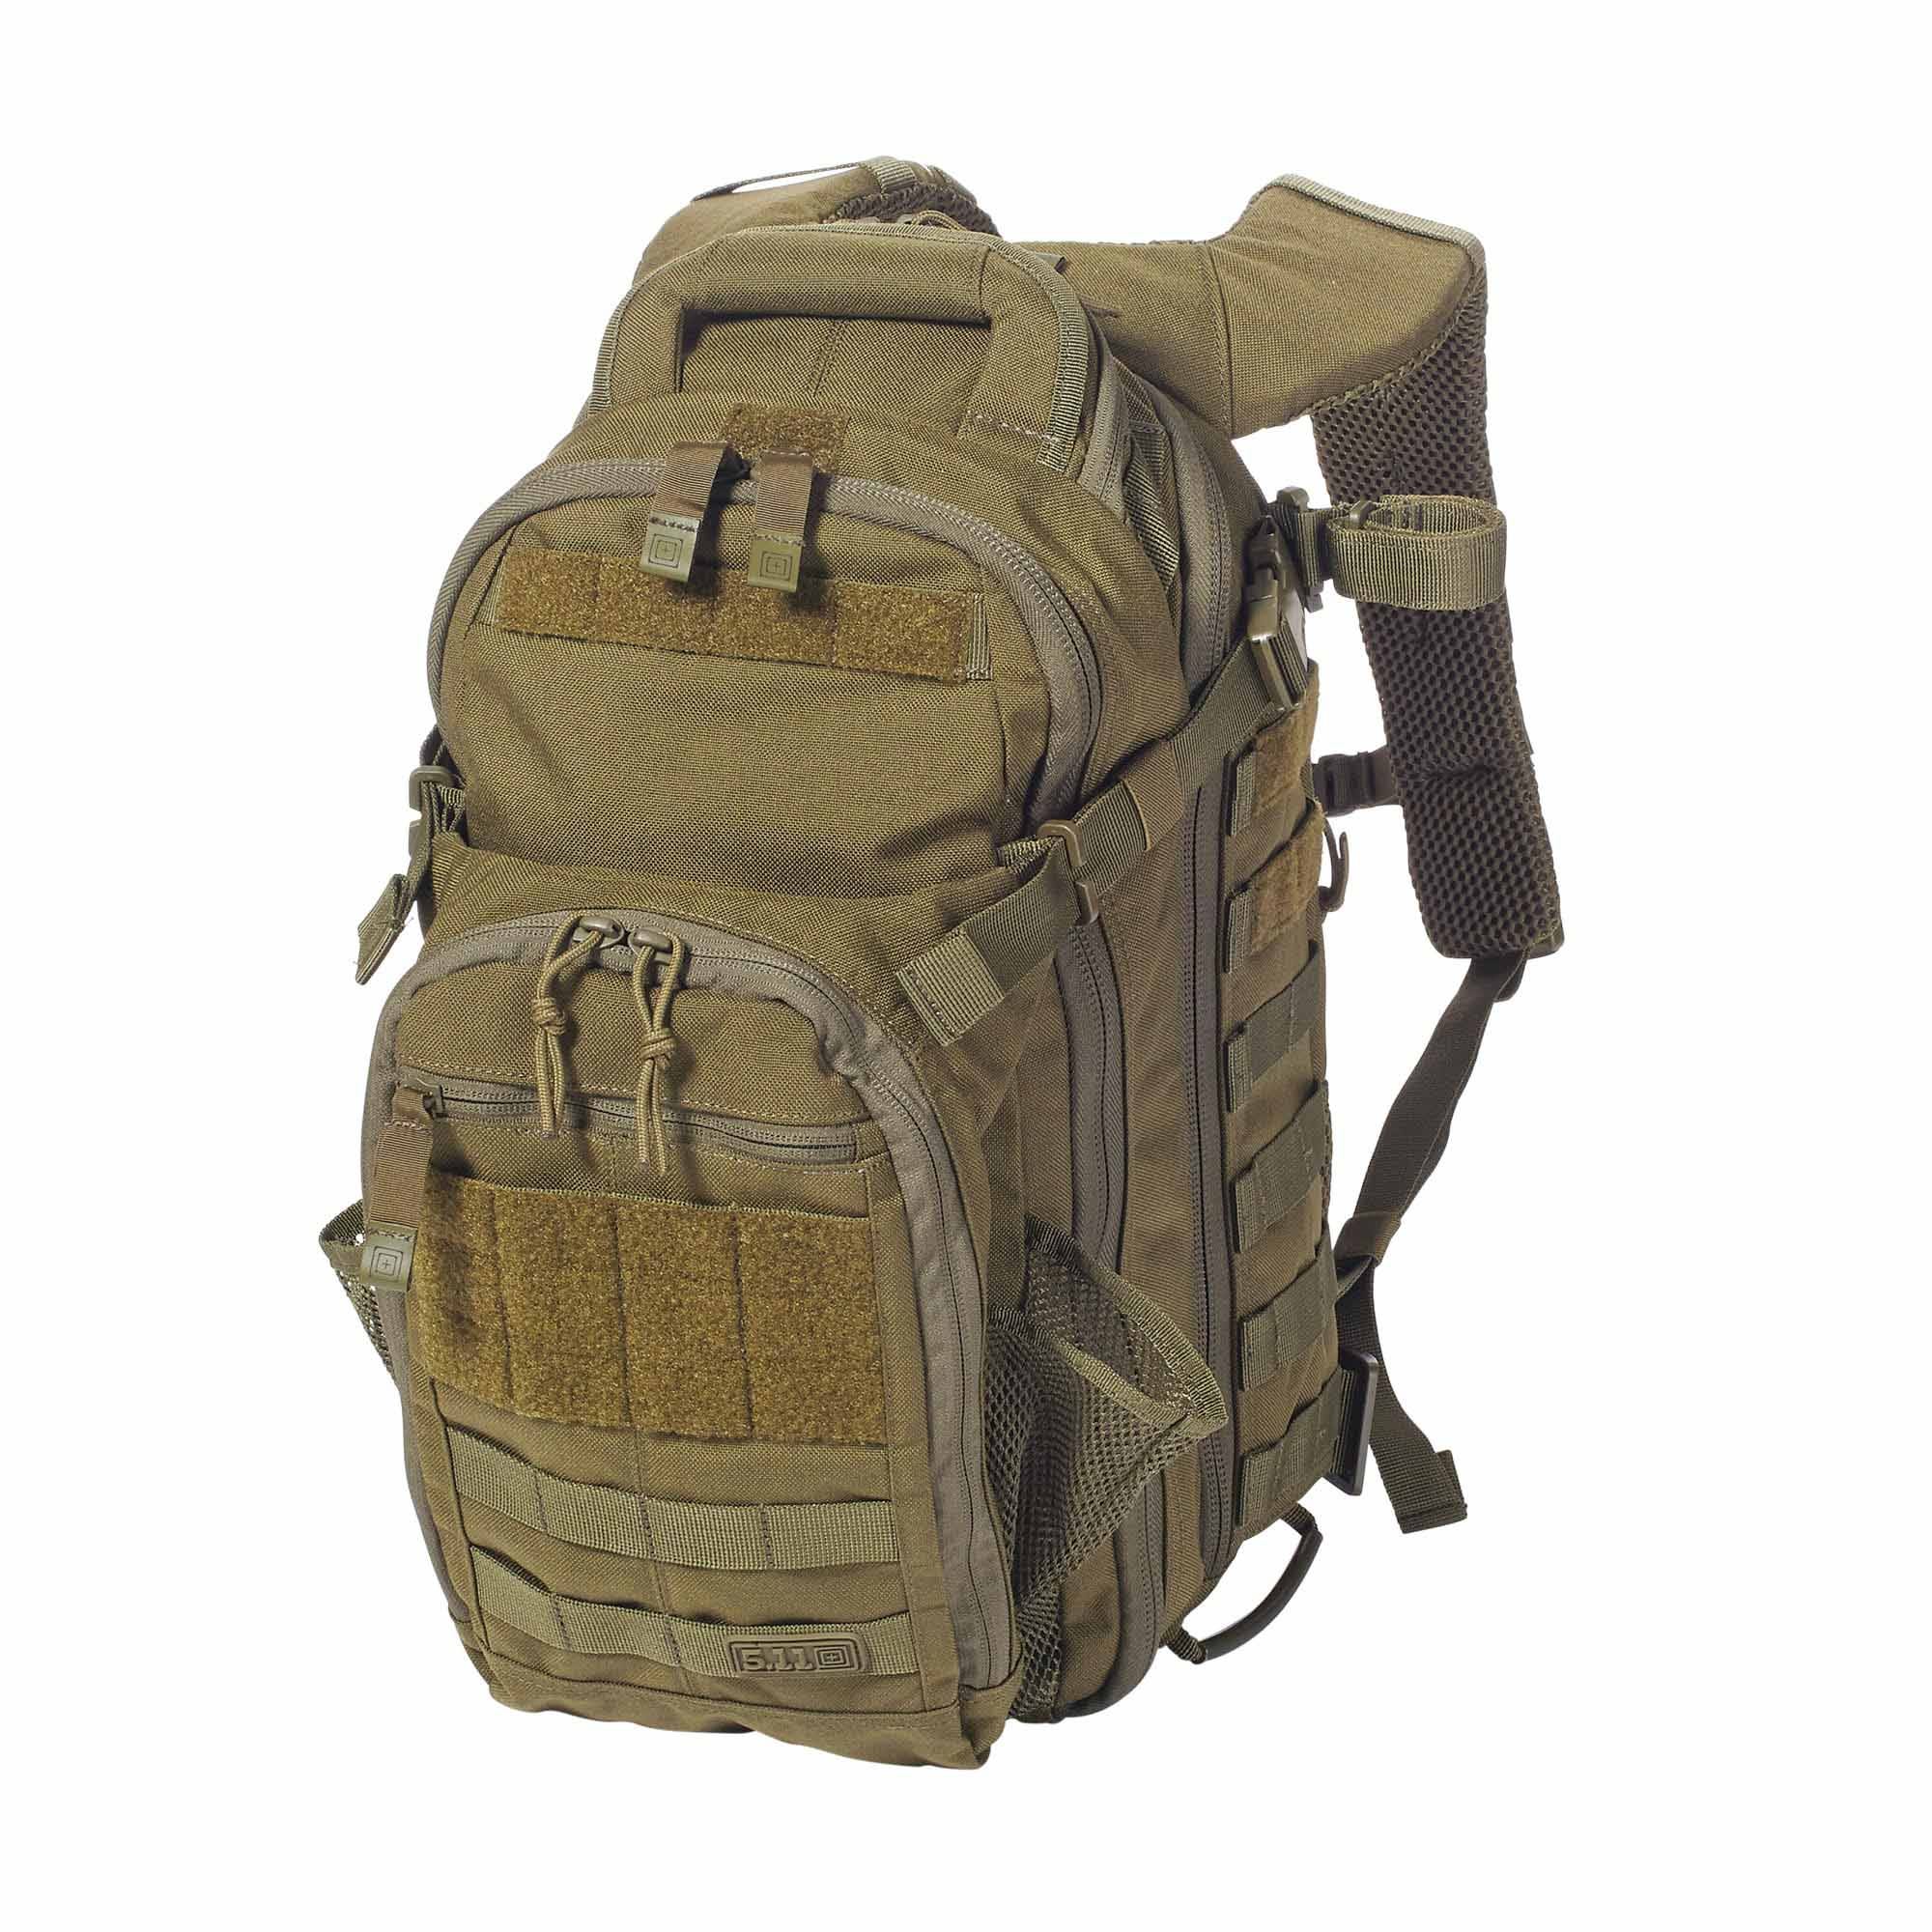 5.11 Tactical All Hazards Nitro Backpack-